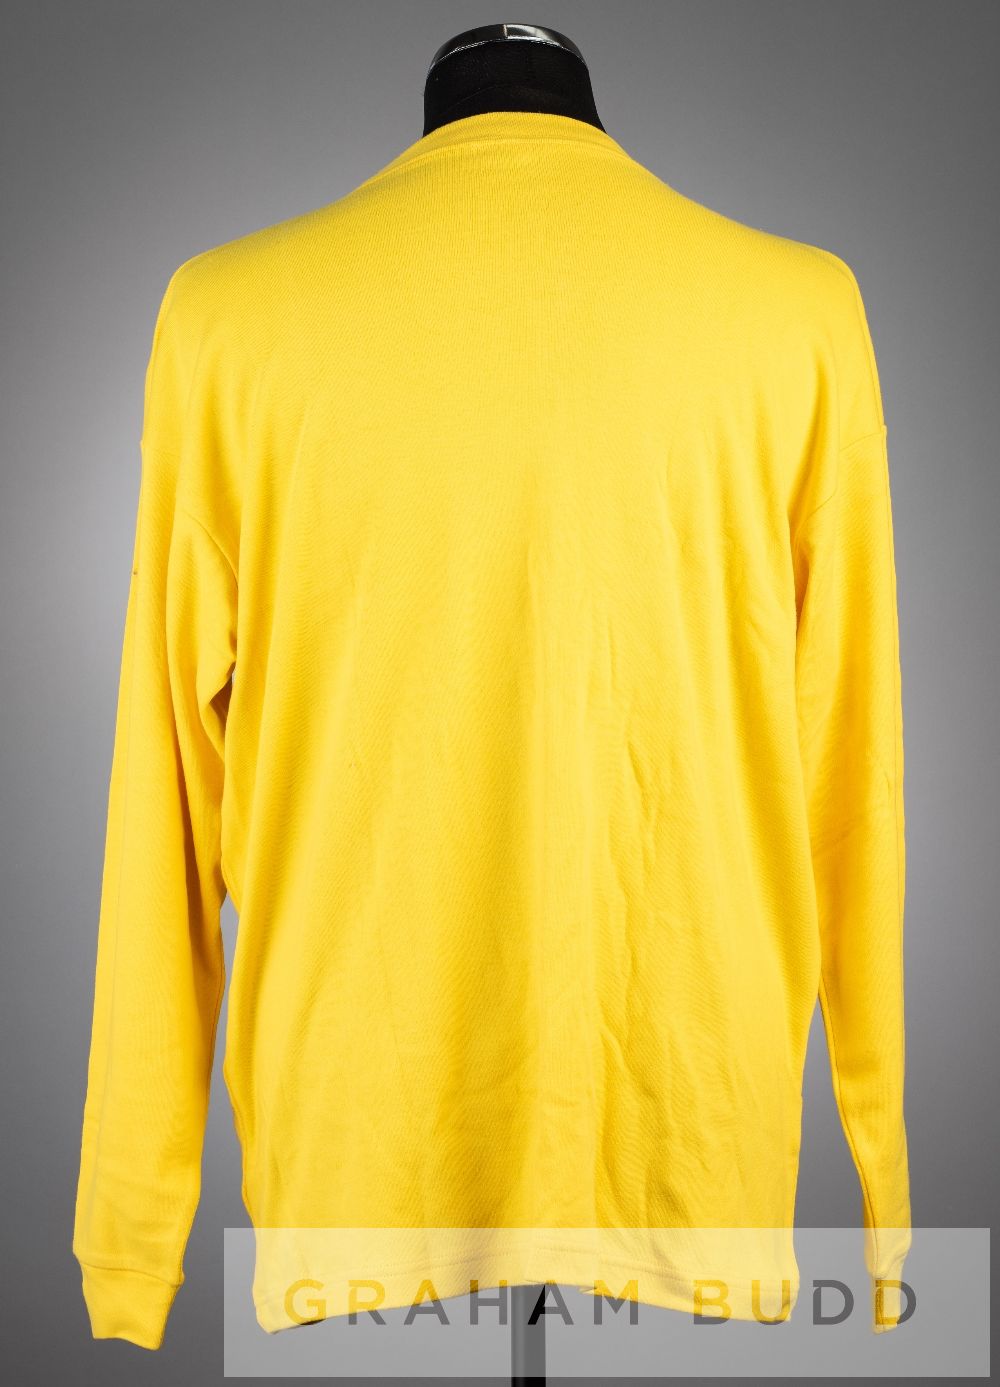 Gordon Banks signed yellow retro 1966 England World Cup winner jersey v West Germany, played at - Image 2 of 2